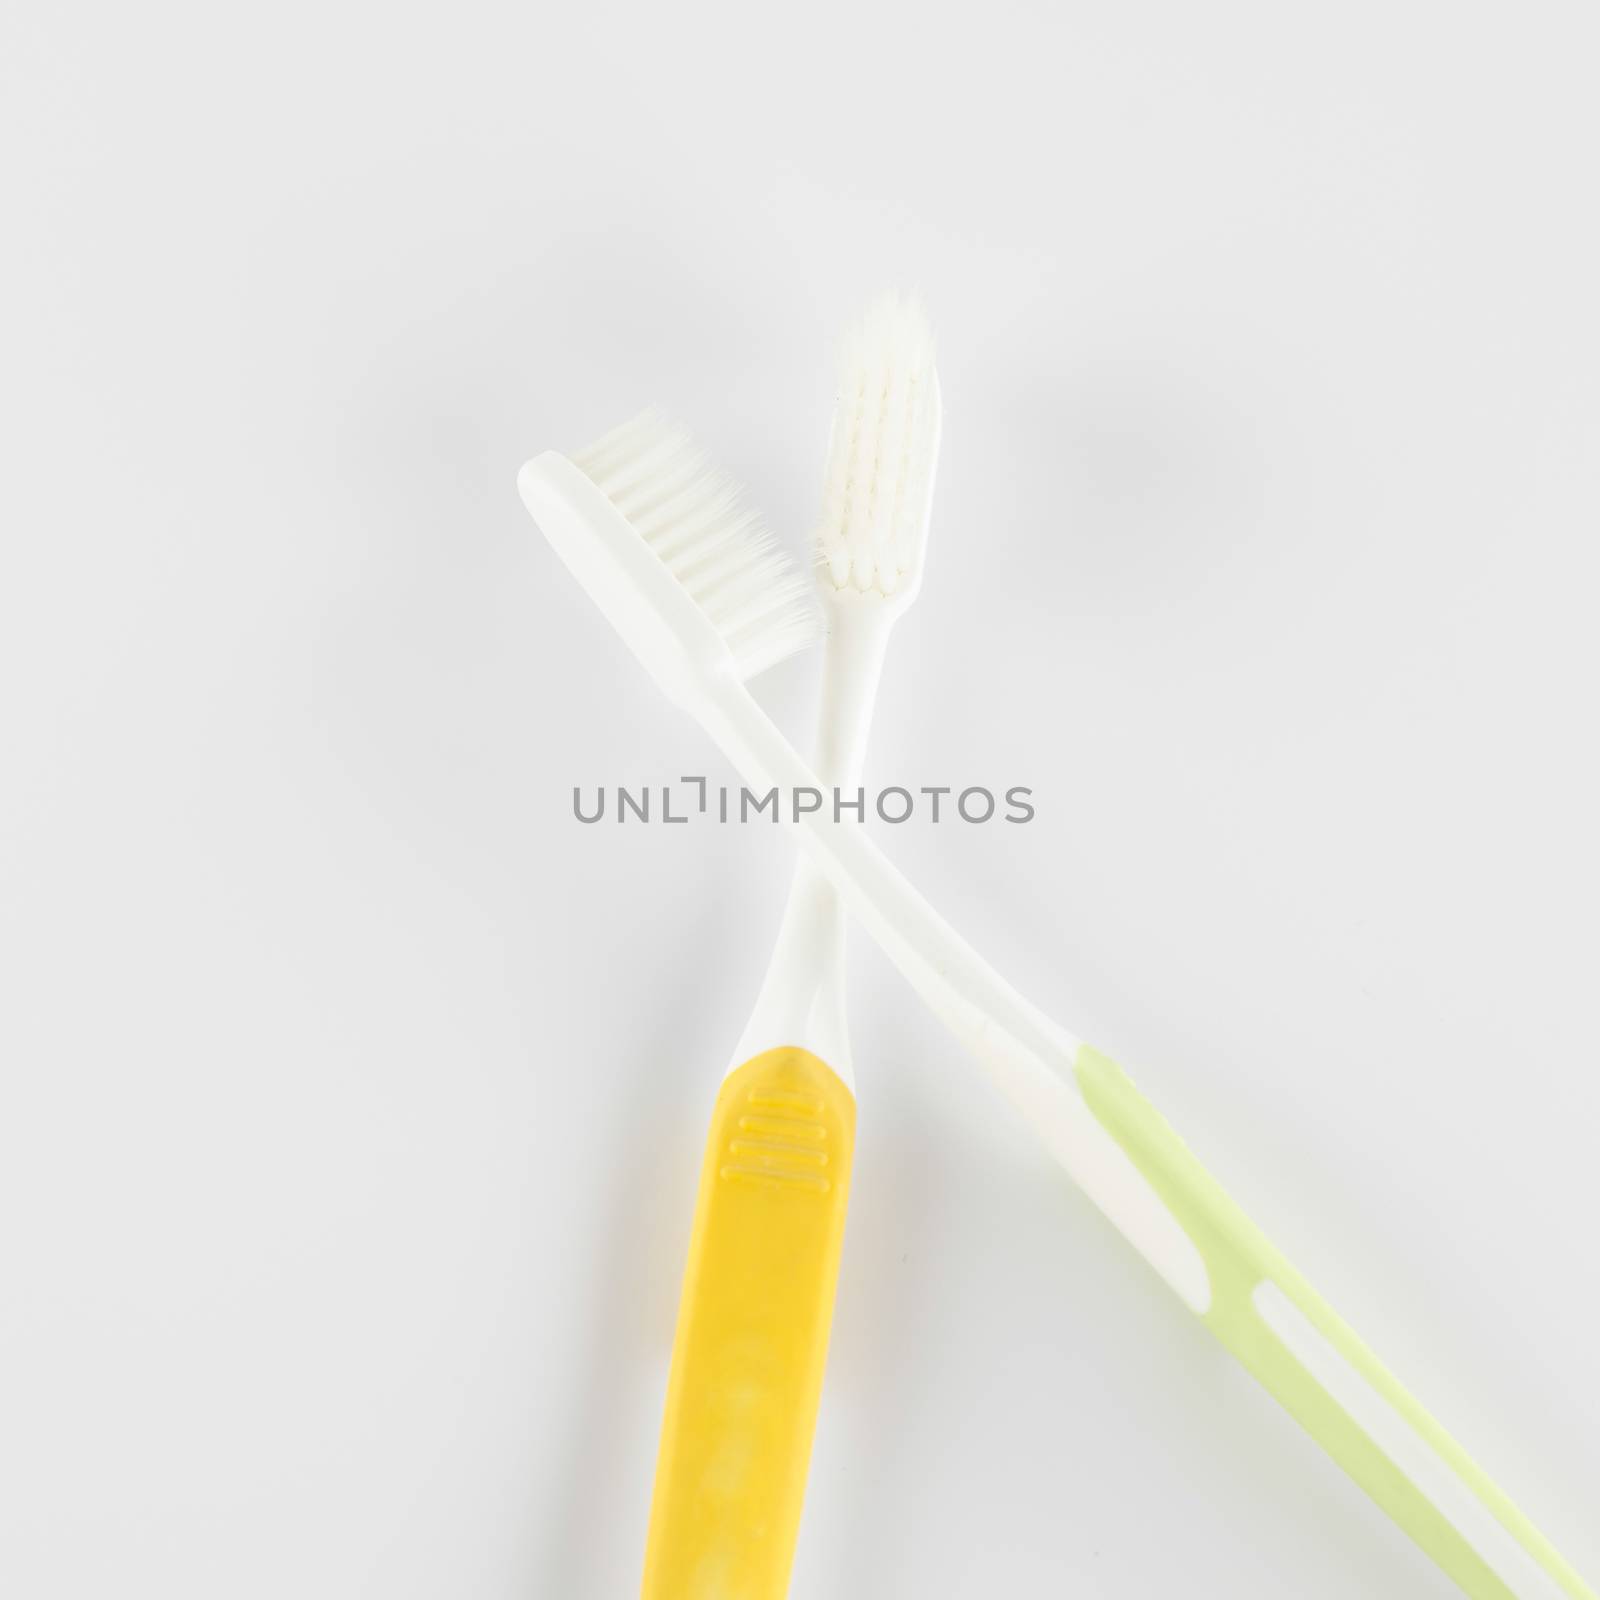 tooth brush on a white background